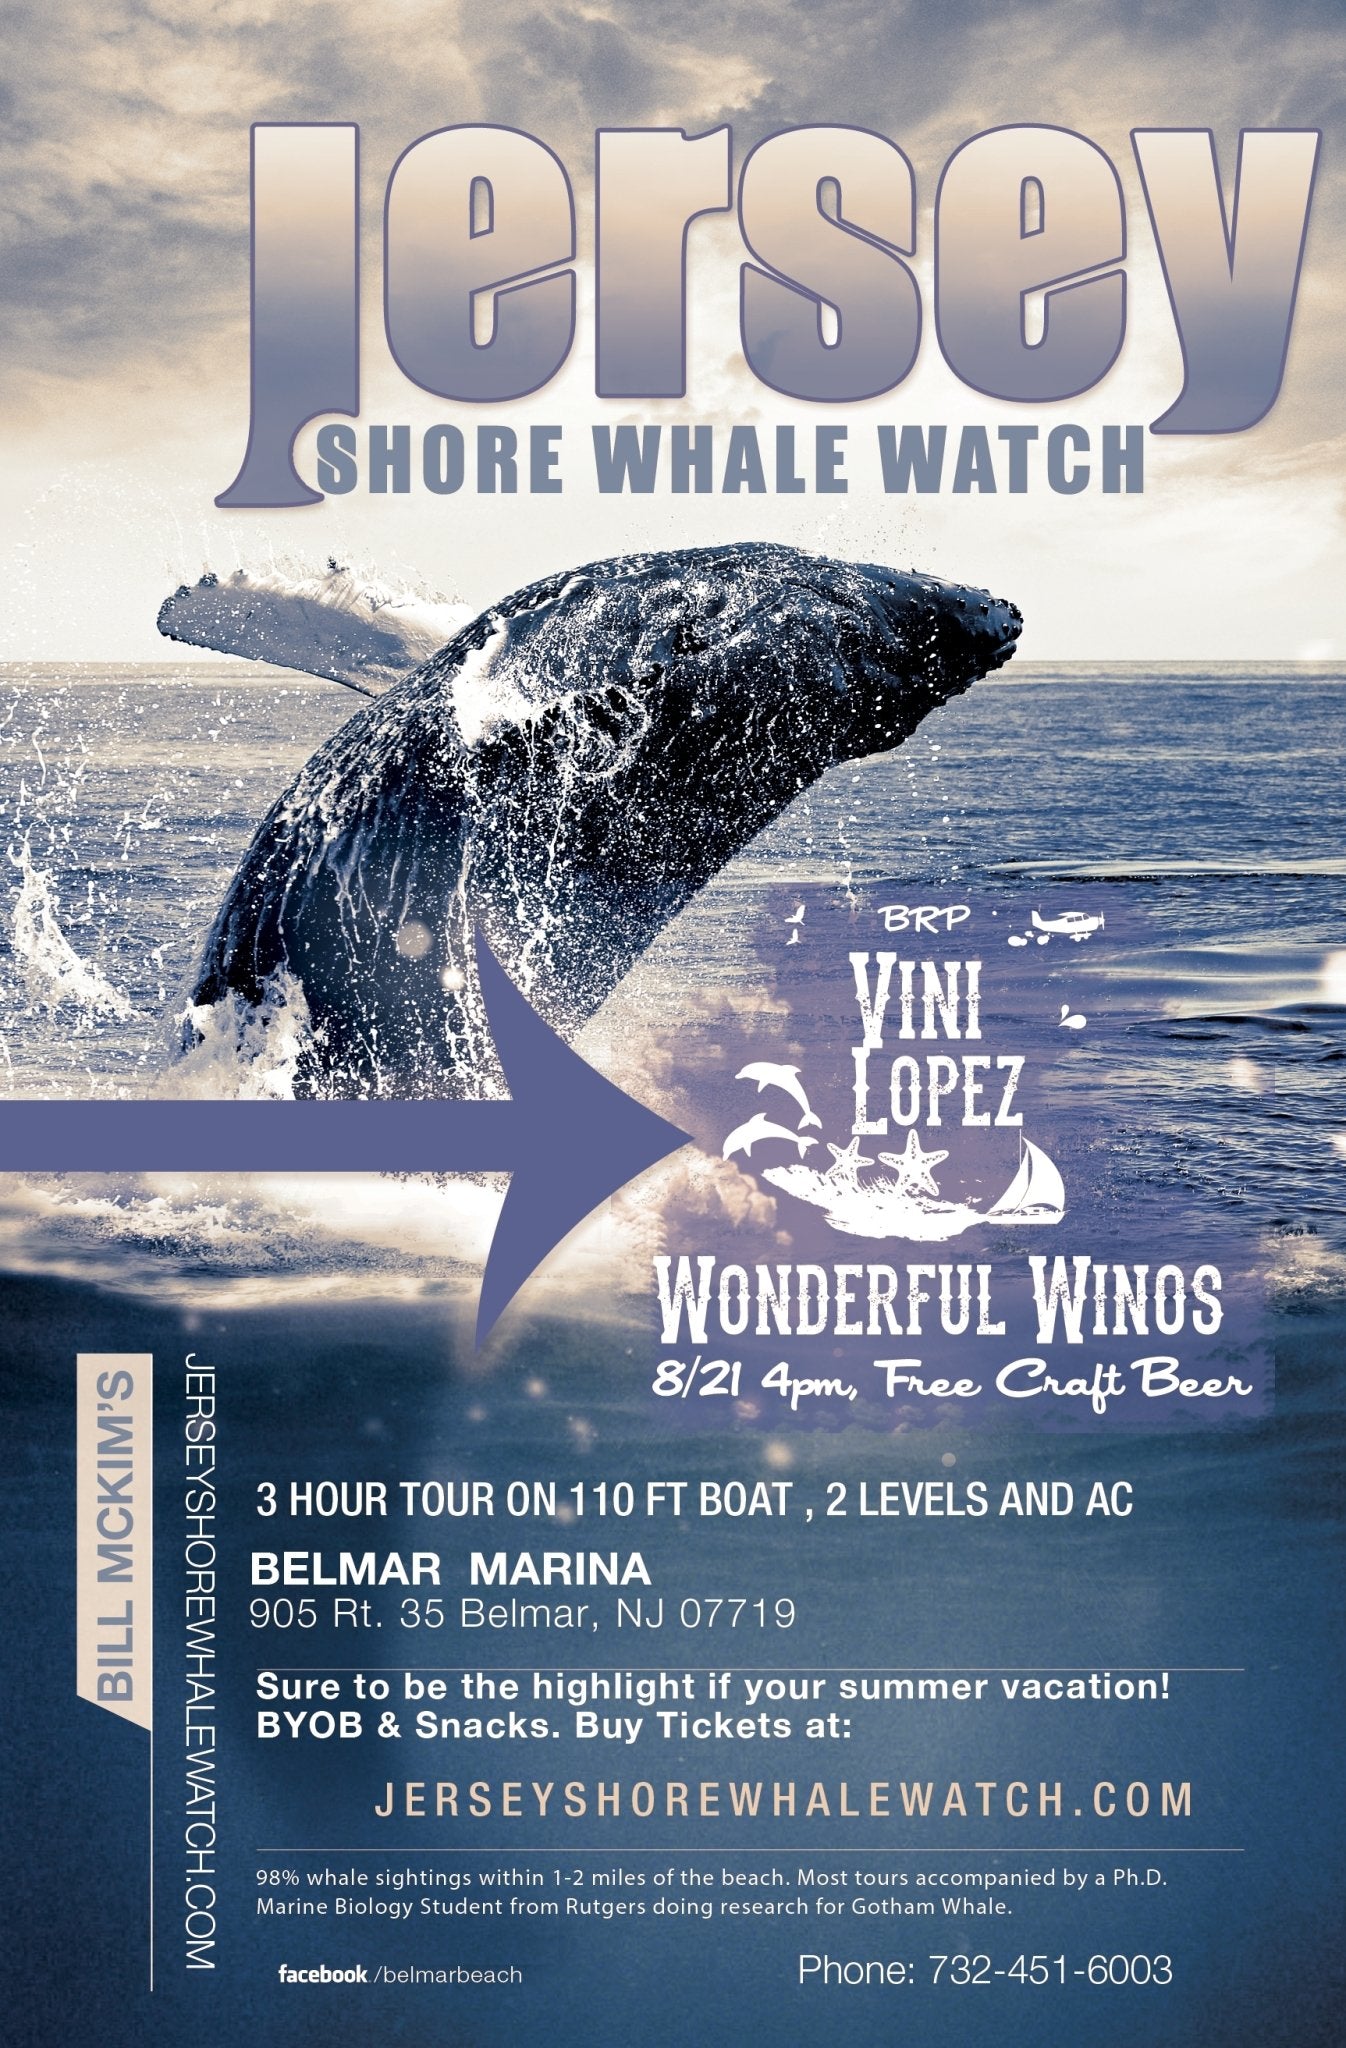 Wednesday Aug 21st Craft Beers whales, and the Wonderful Winos Band trip info